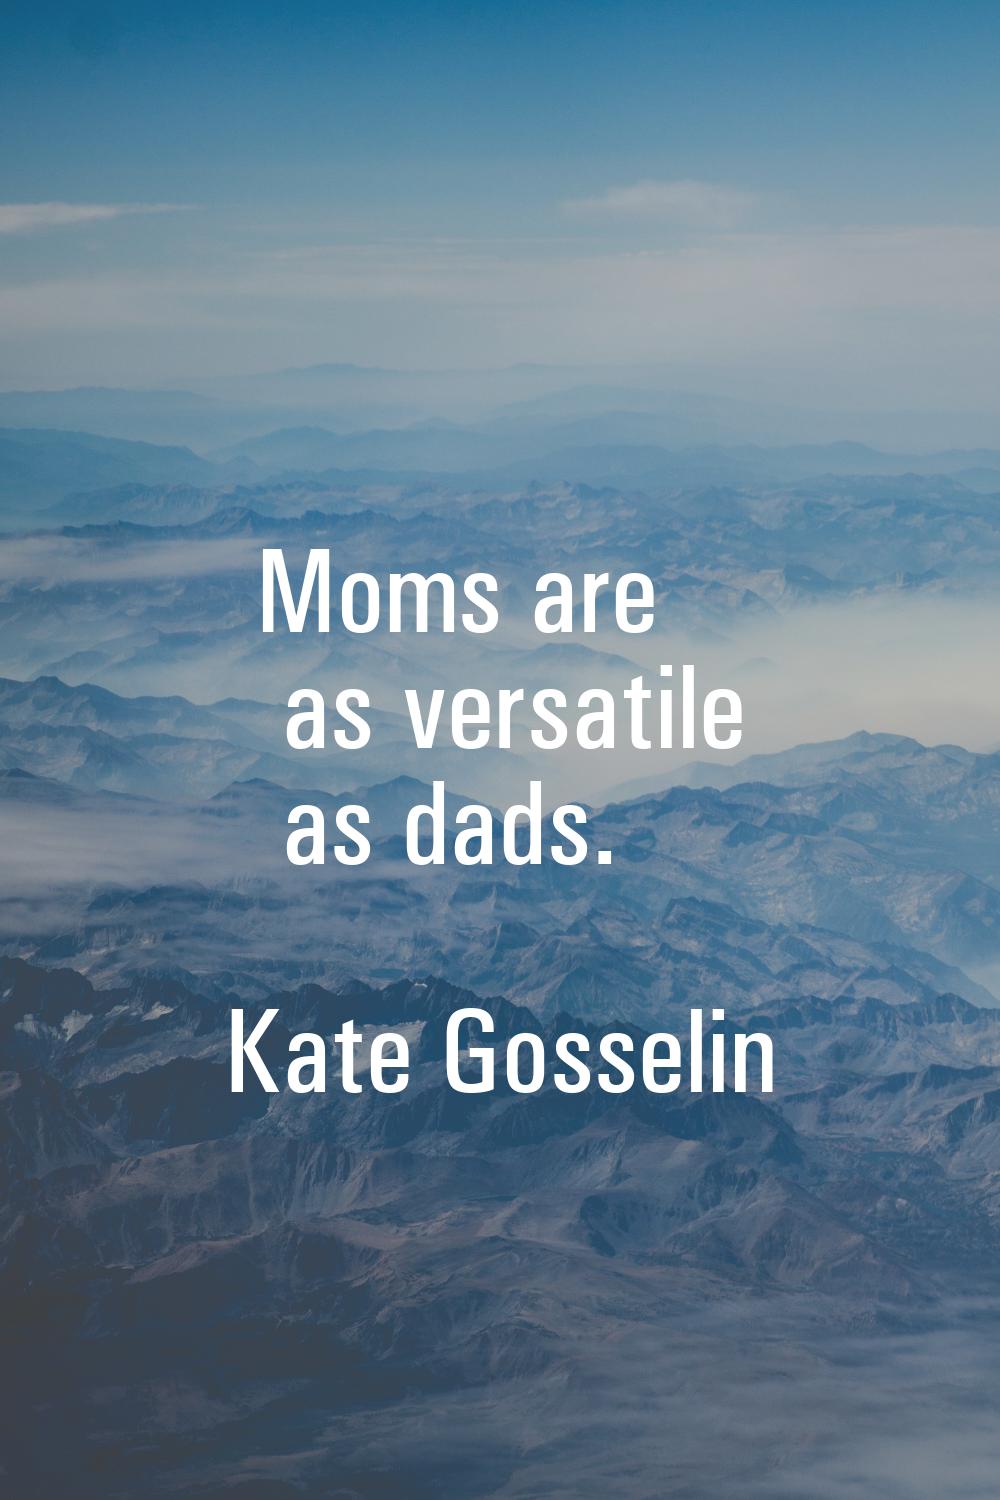 Moms are as versatile as dads.